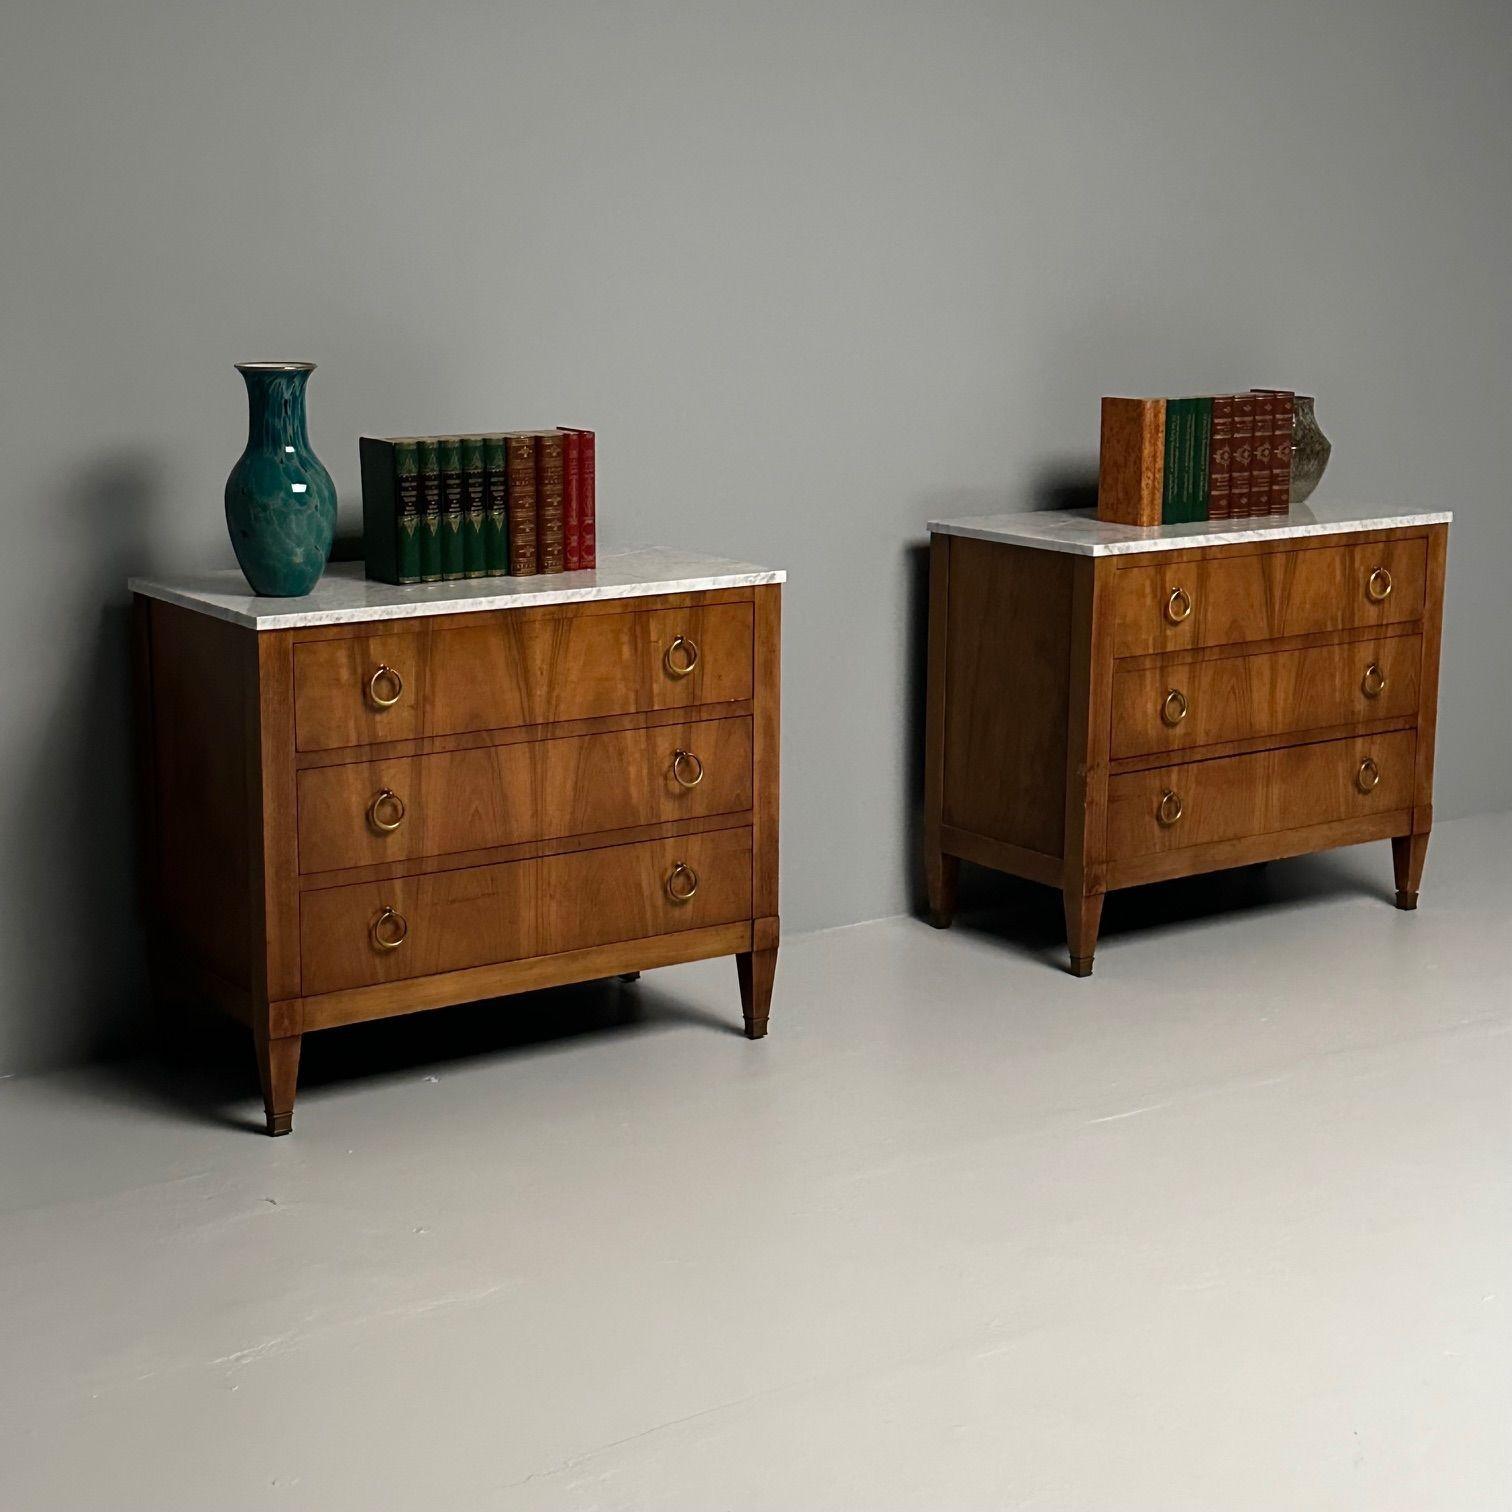 Mid-Century Modern Baker Furniture Compnany, PE Guerin, Provincial, Pair of Cabinets, Marble, Brass